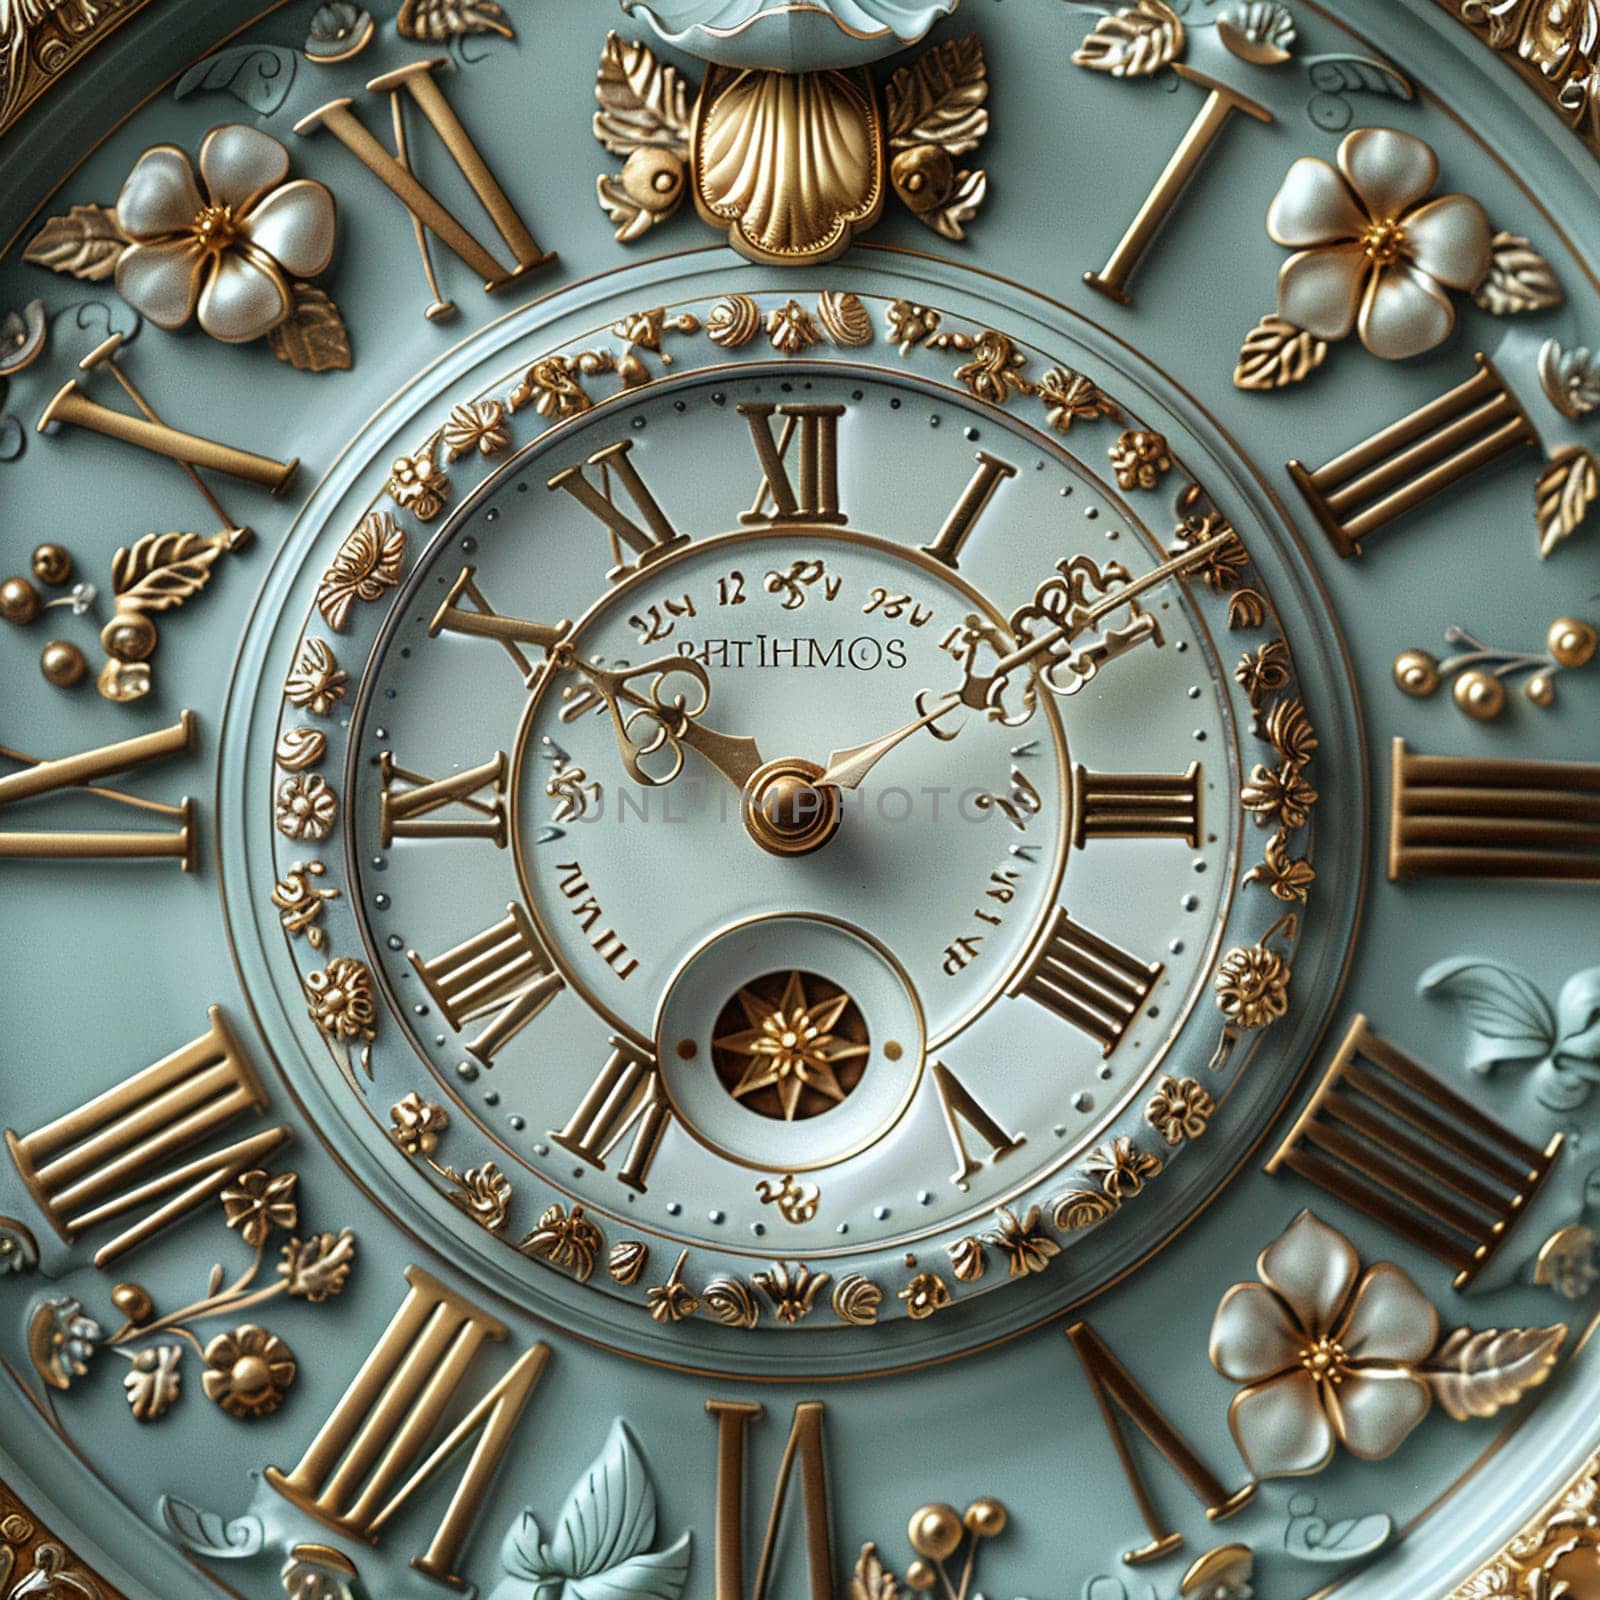 Ornate clock face close-up, representing time and history.